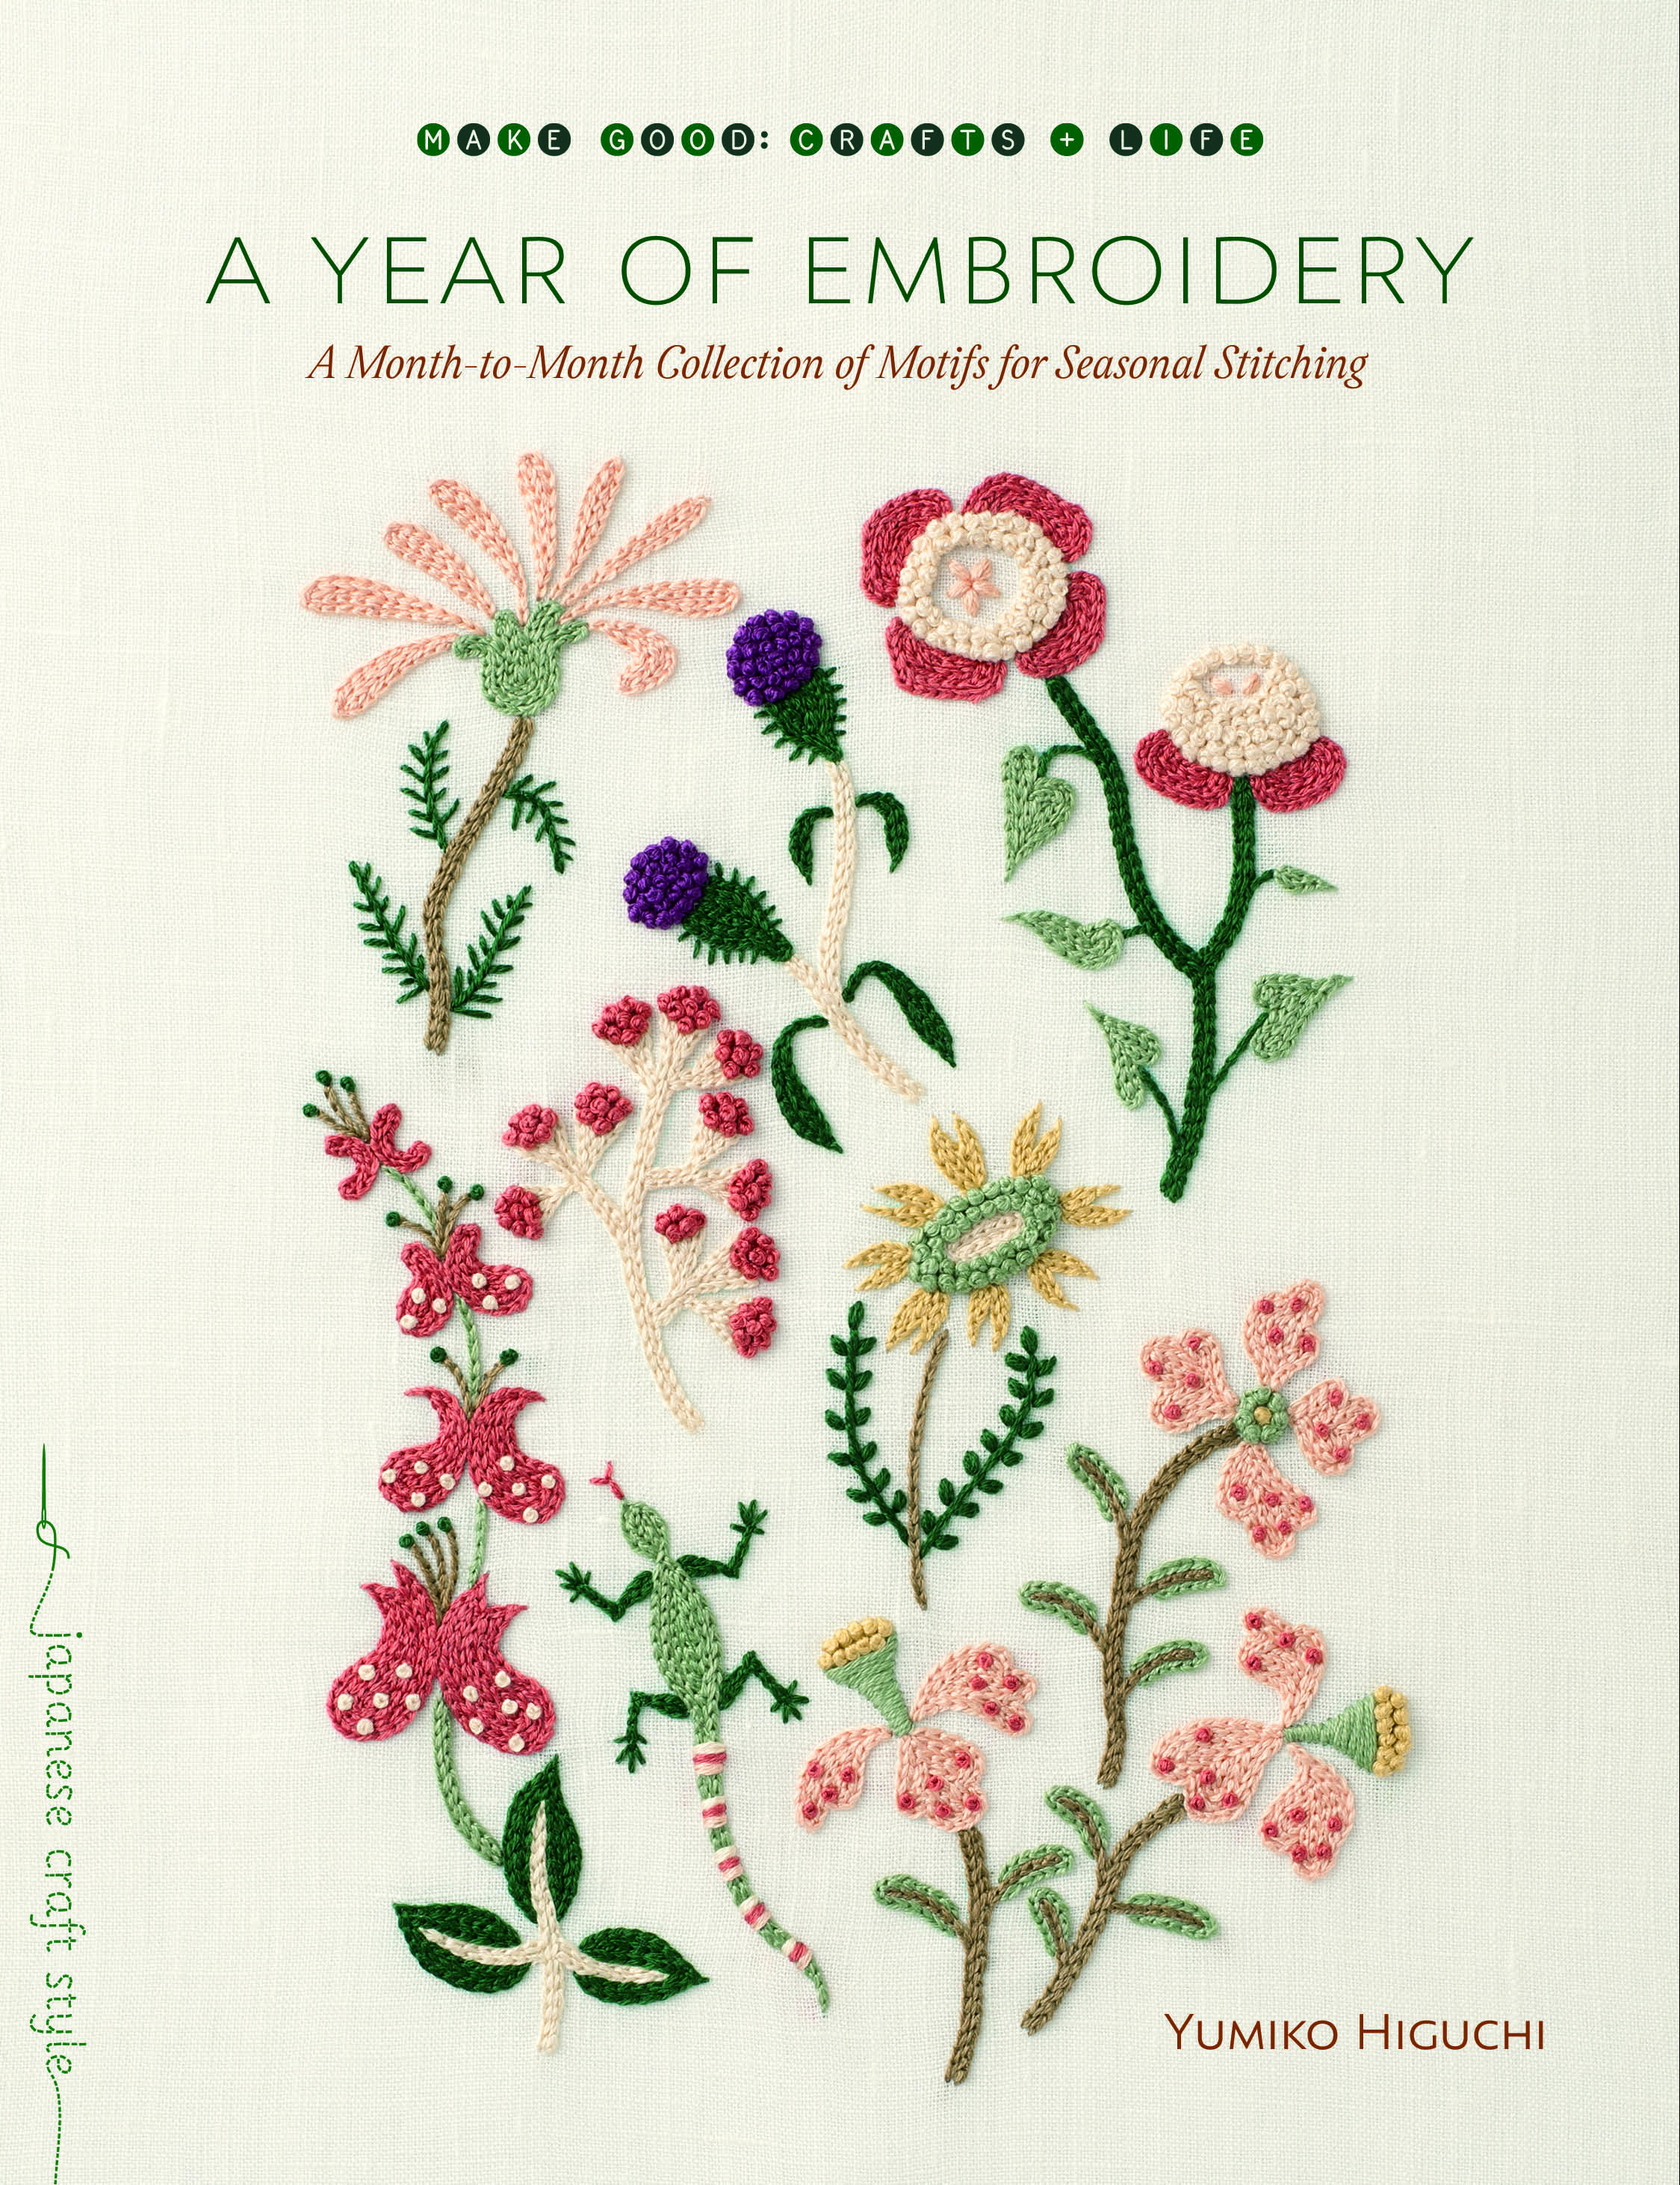 Embroidery Flower Pattern Diy Floral Cactus Embroidery Projects From A Year Of Embroidery